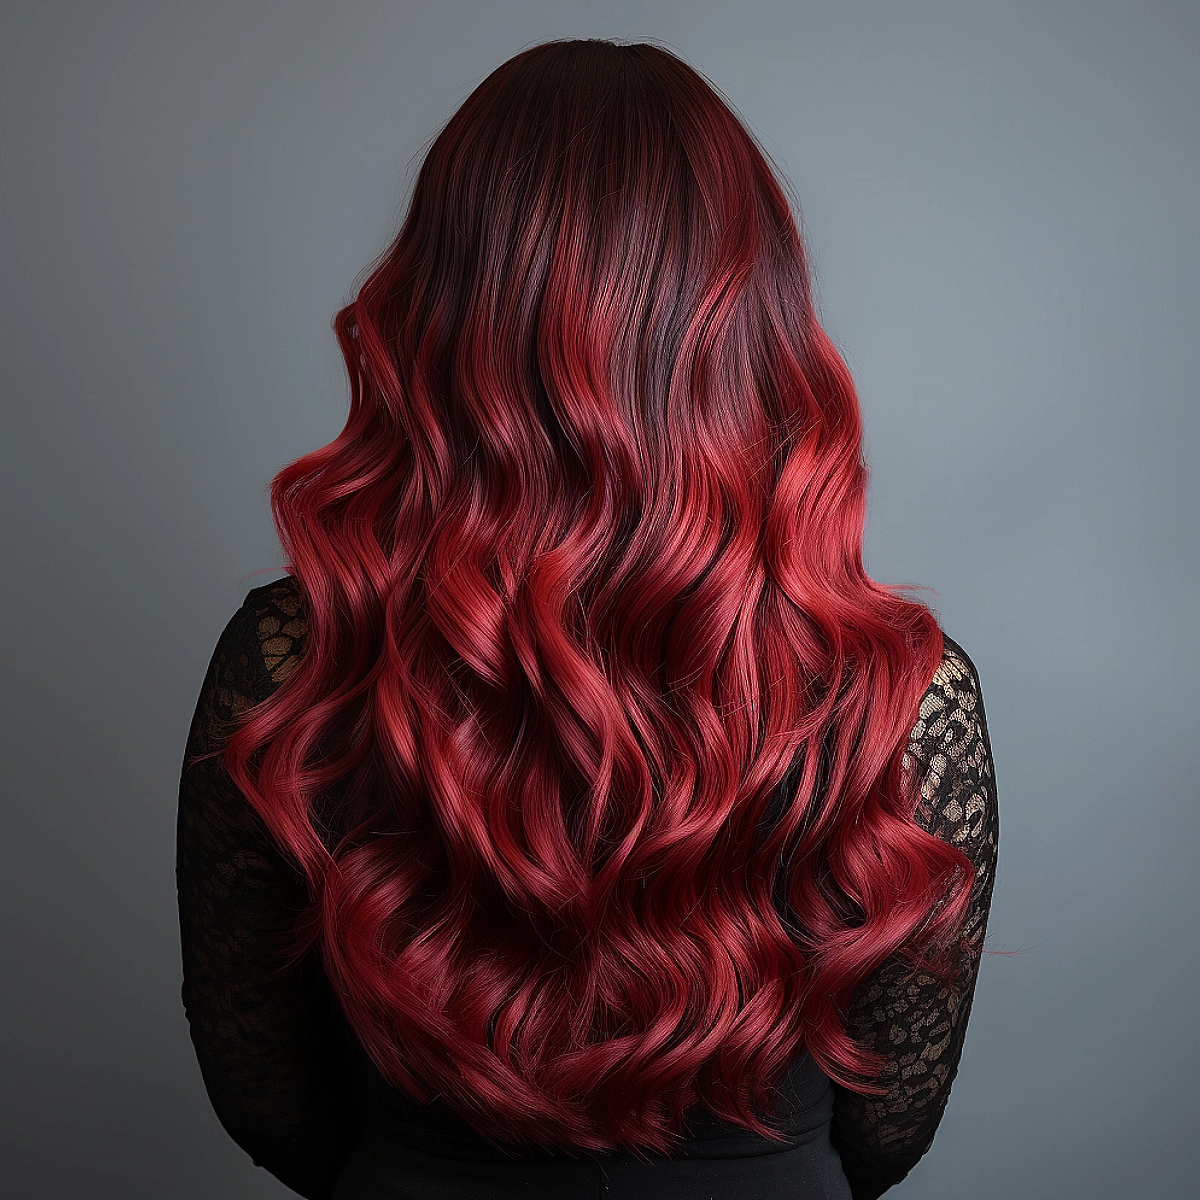 DIY Red Ombre Hair Tutorial